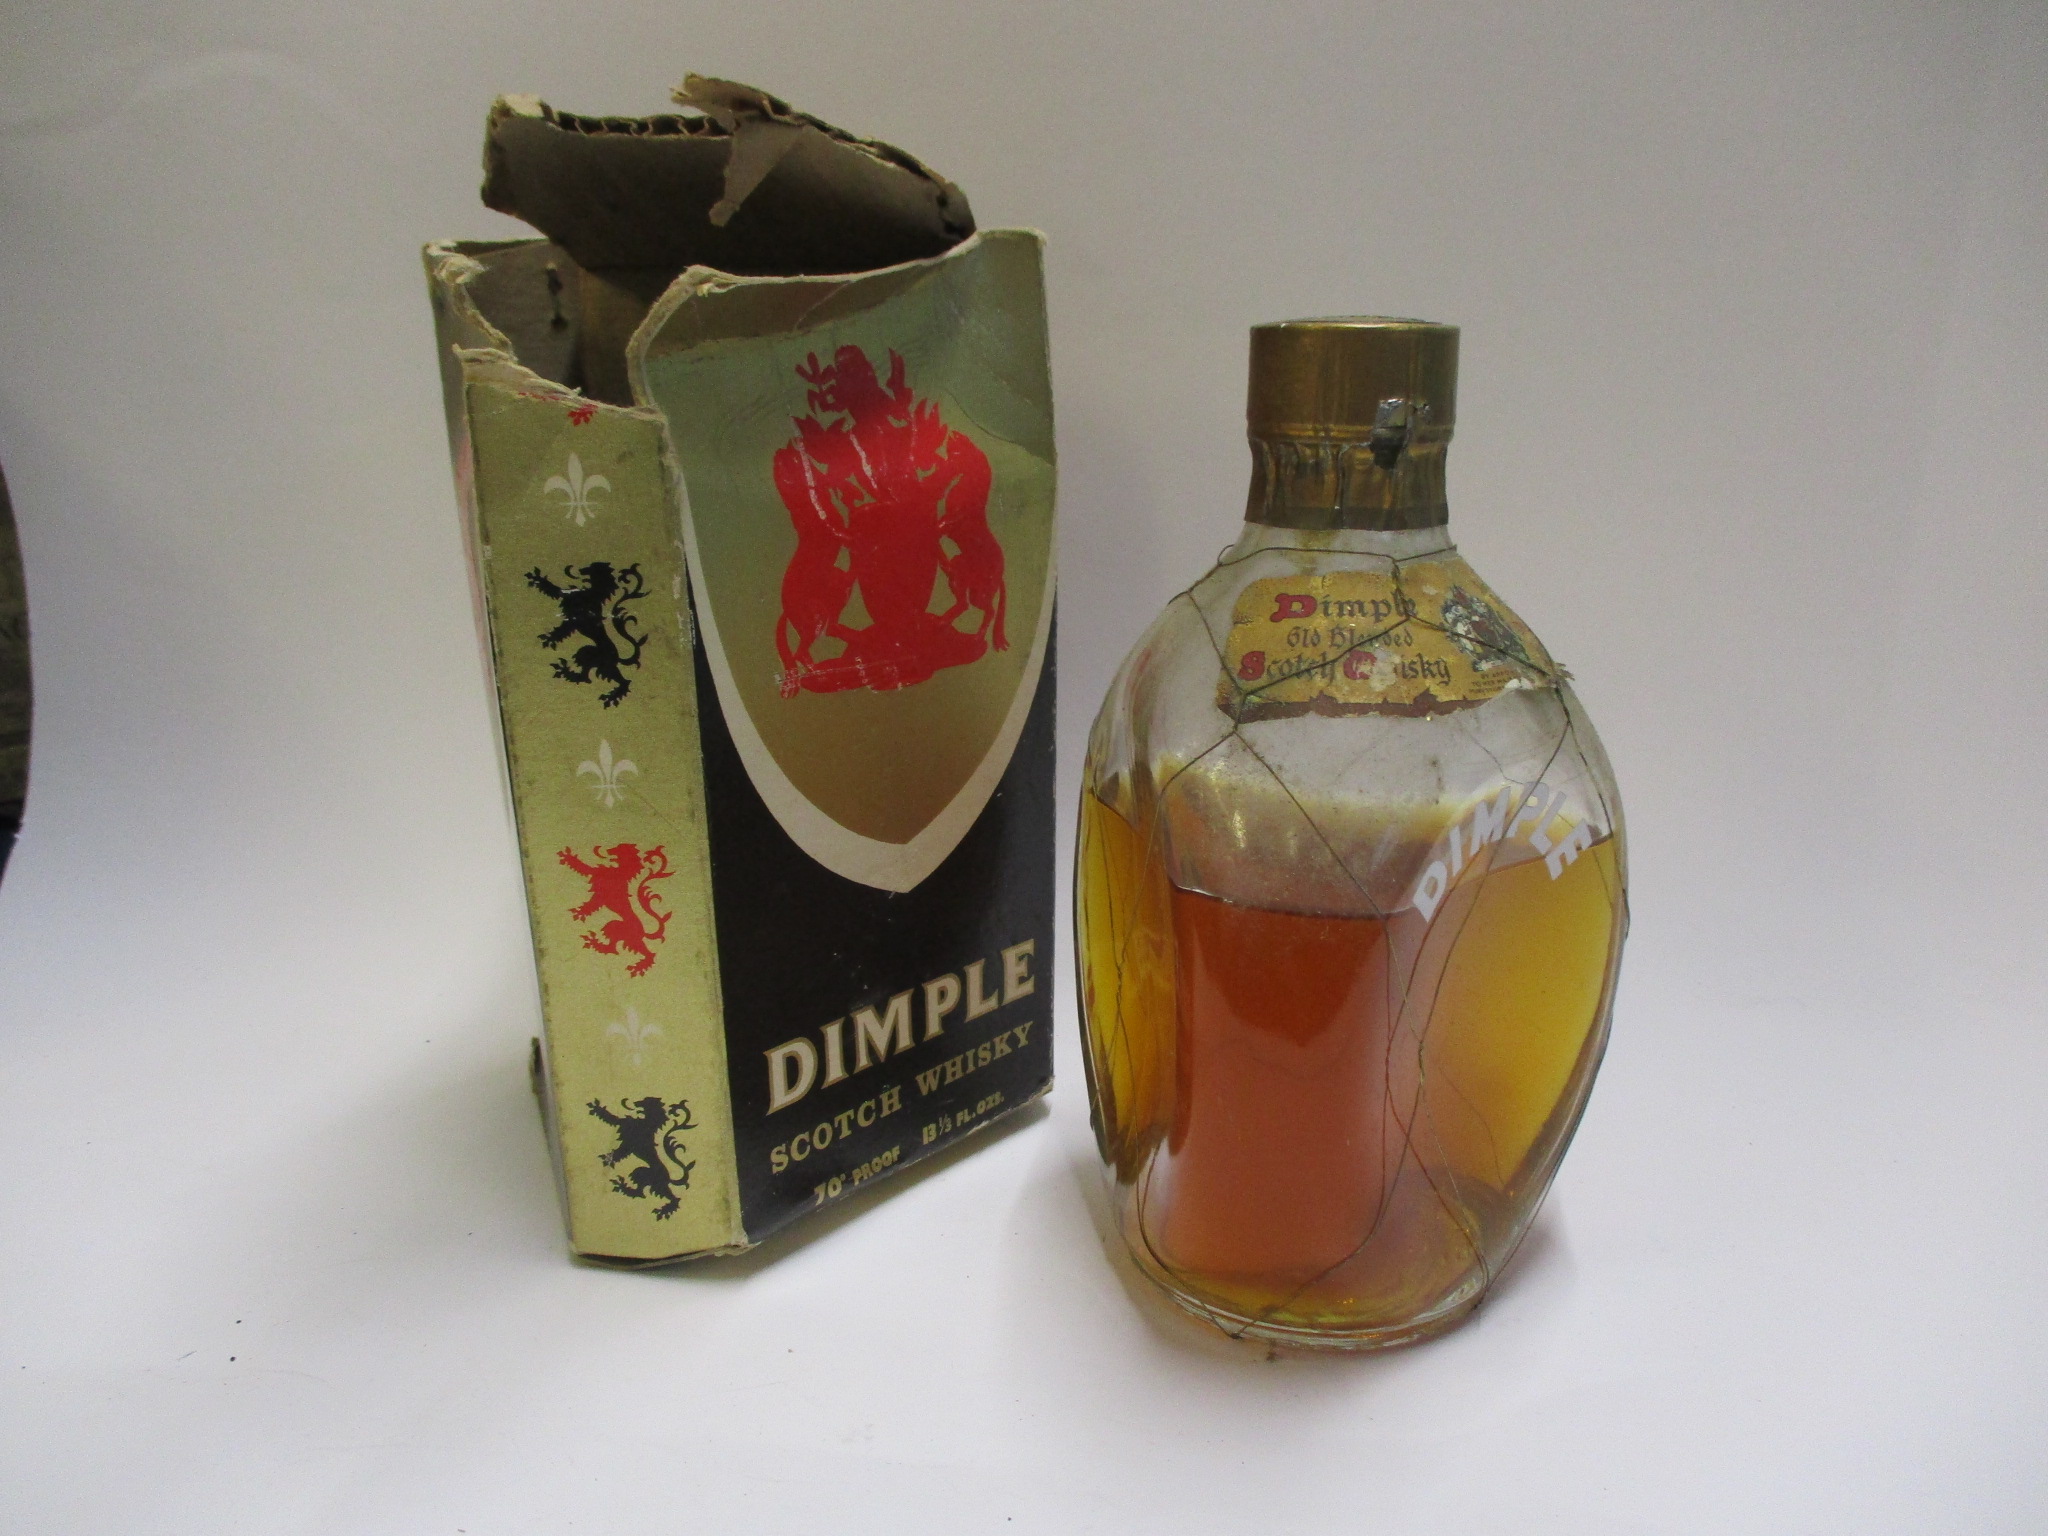 Dimple Haig Whisky in original box - 70° proof, 1 bottle